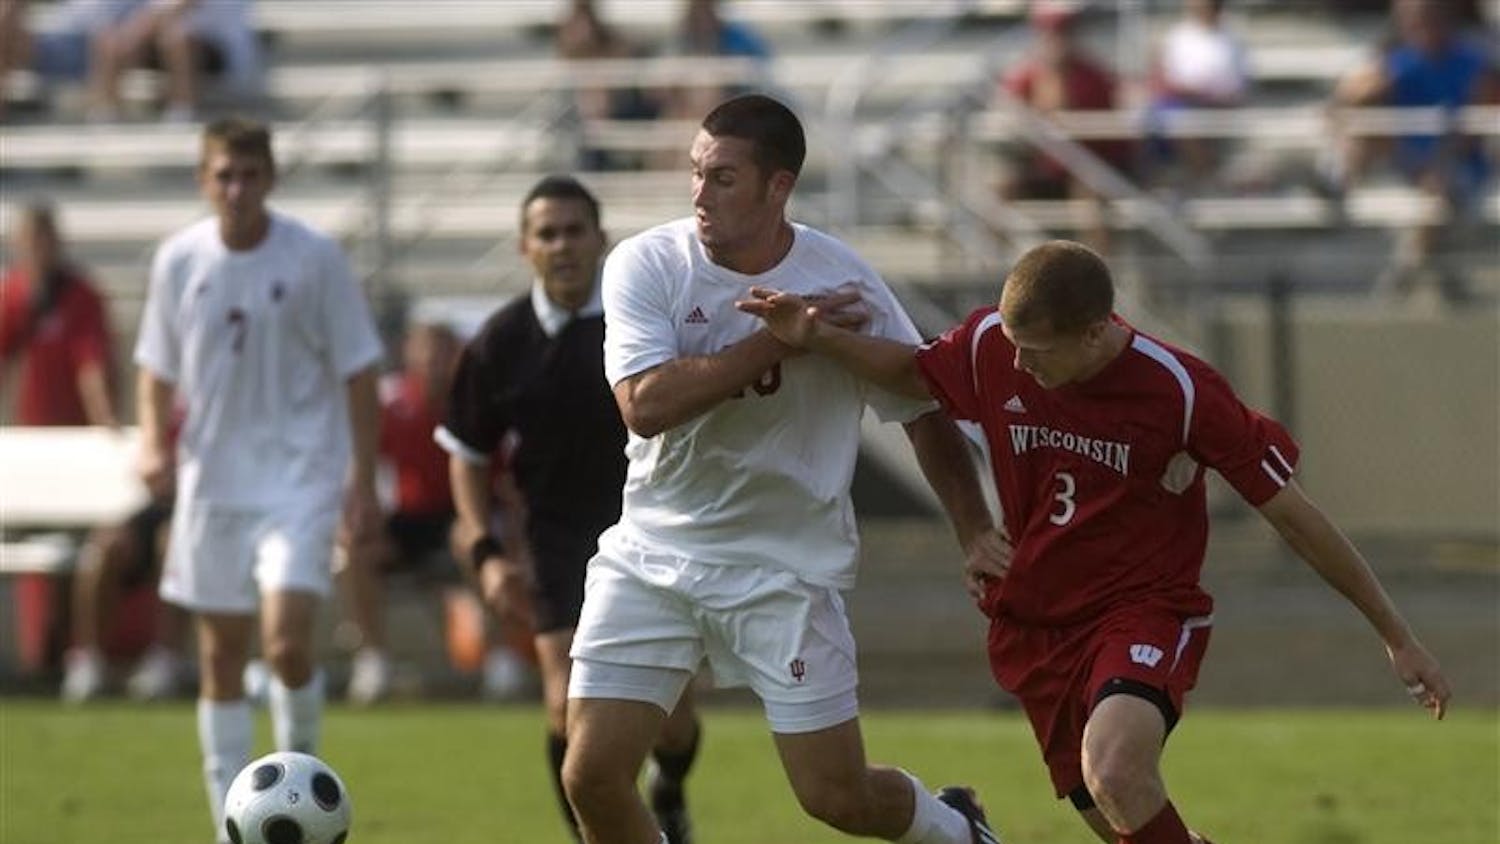 Freshman forward Will Bruin dribbles past Wisconsin defender Zack Lambo during a 3-2 Hoosier victory on Sunday, Sept. 21 at Bill Armstrong Stadium.  Bruin scored 2 goals to help IU defeat Evansville 3-2 Tuesday night in Evansville.